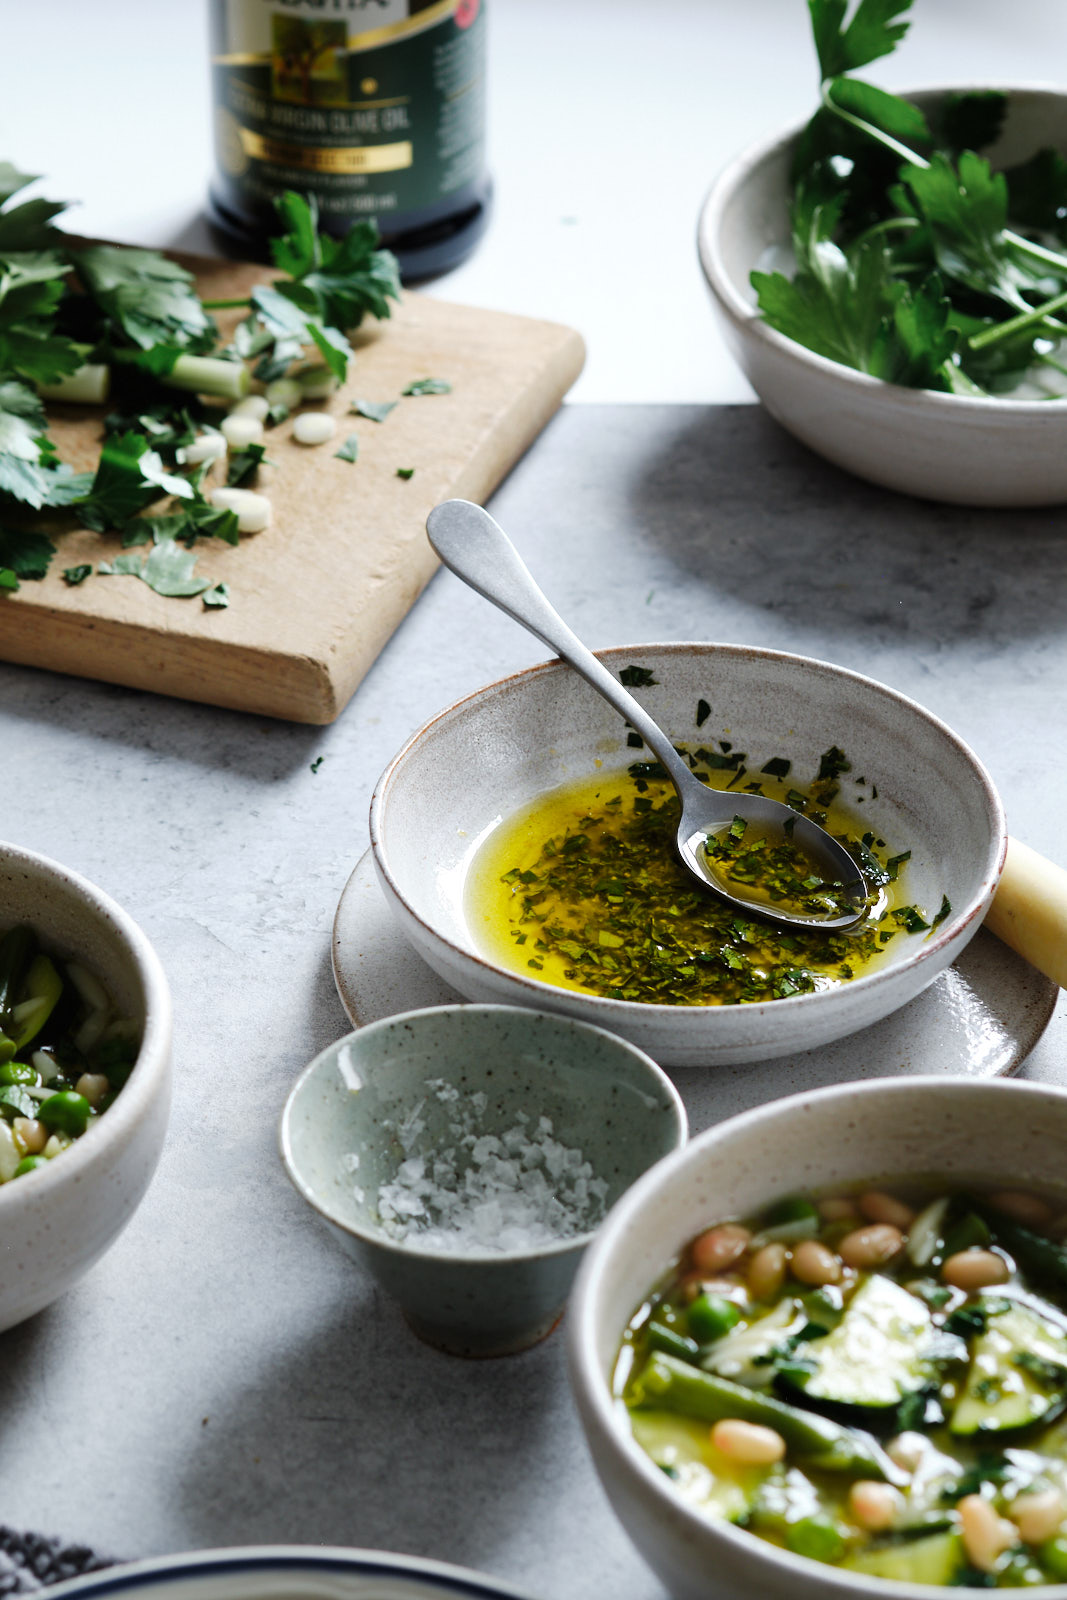 Herb, lemon, and olive oil sauce to serve with green minestrone soup